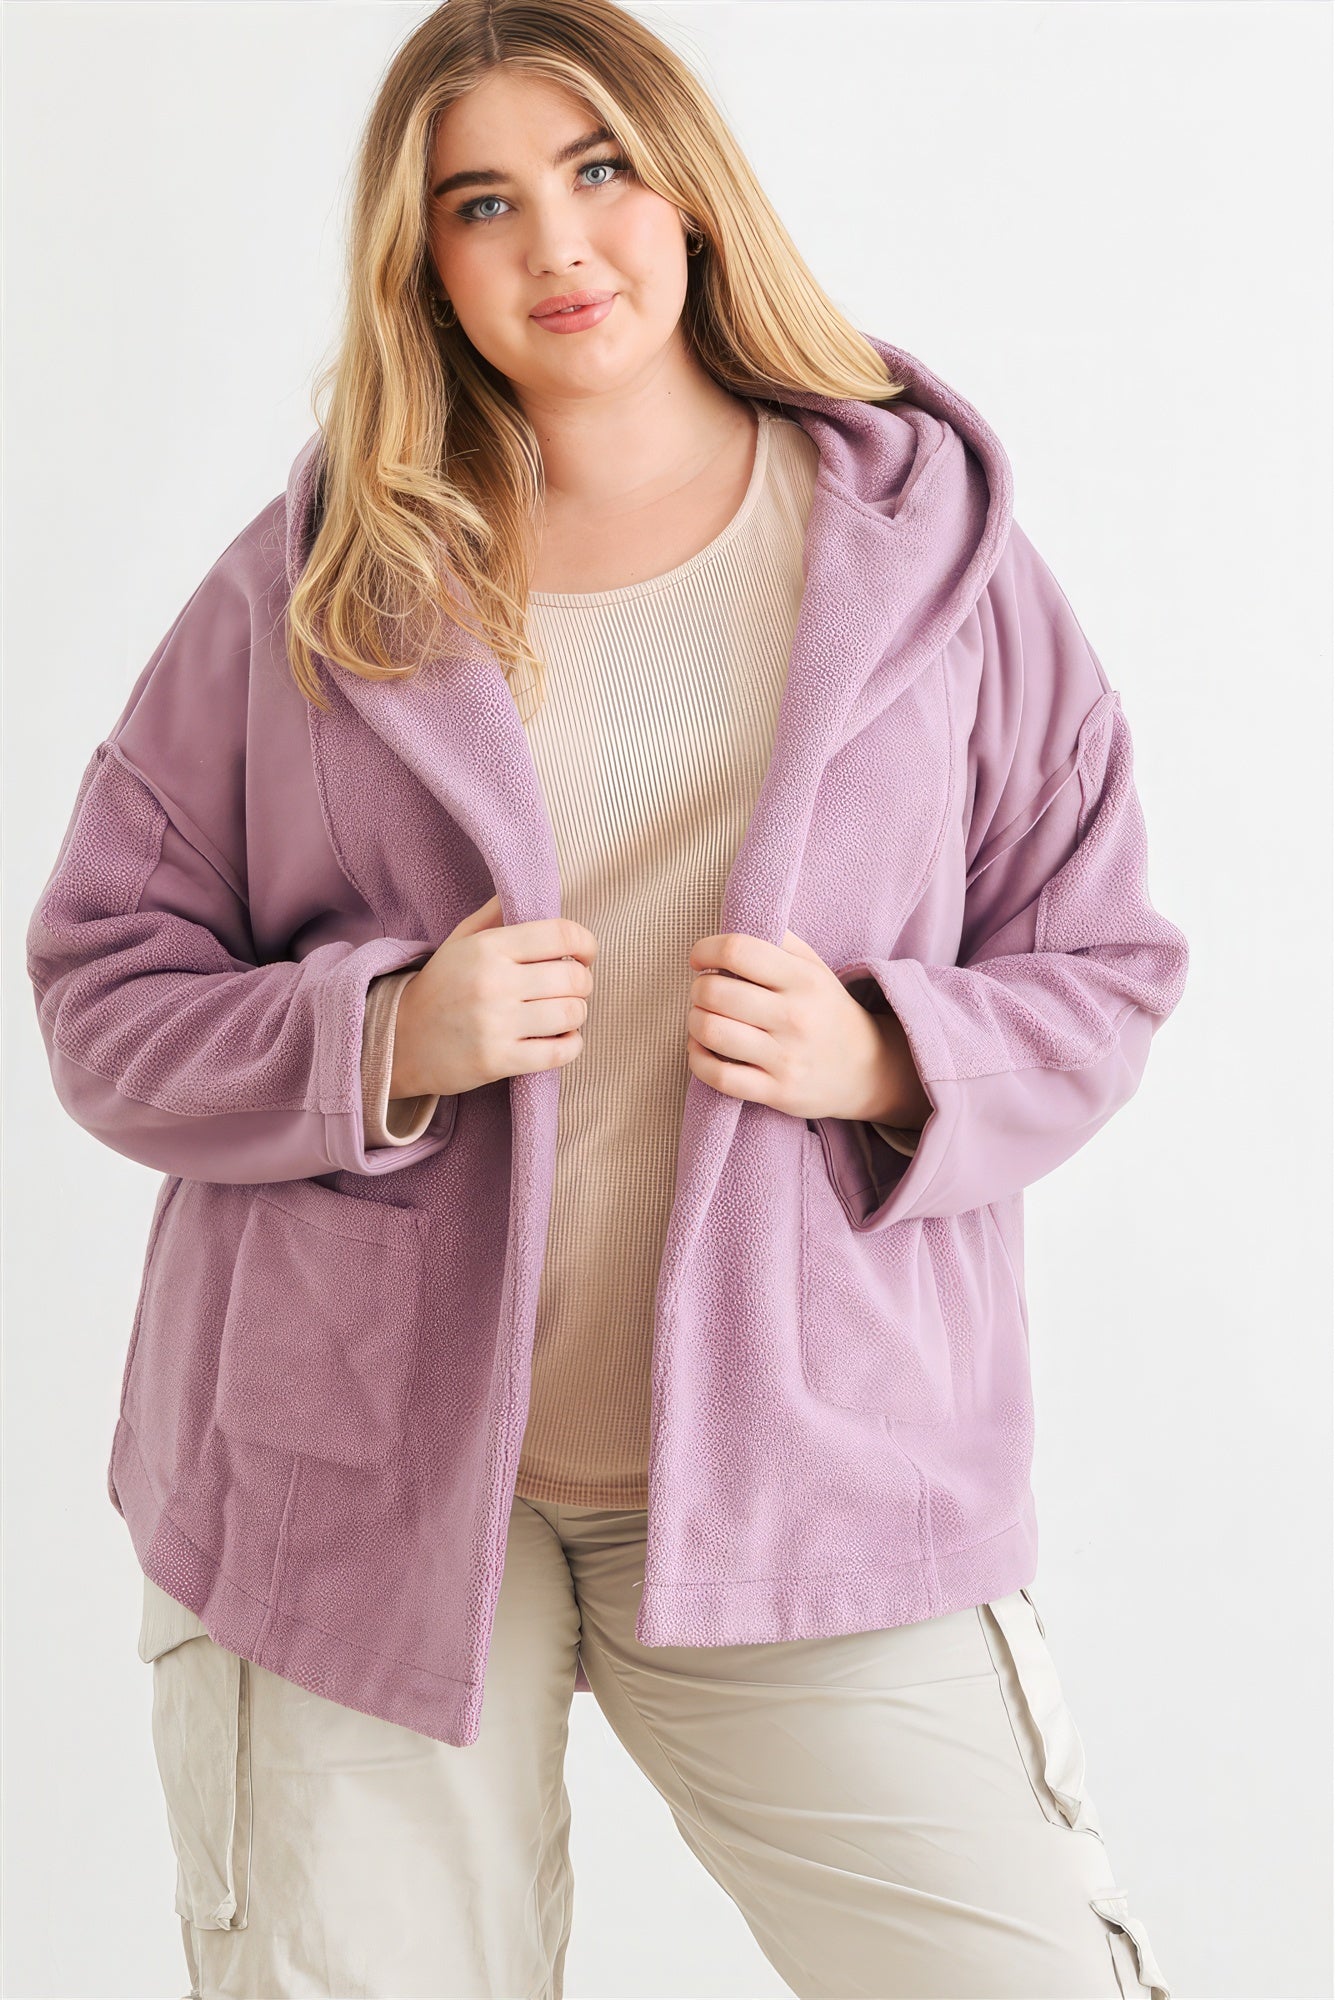 Women's Plus Two Pocket Open Front Soft To Touch Hooded Cardigan Jacket